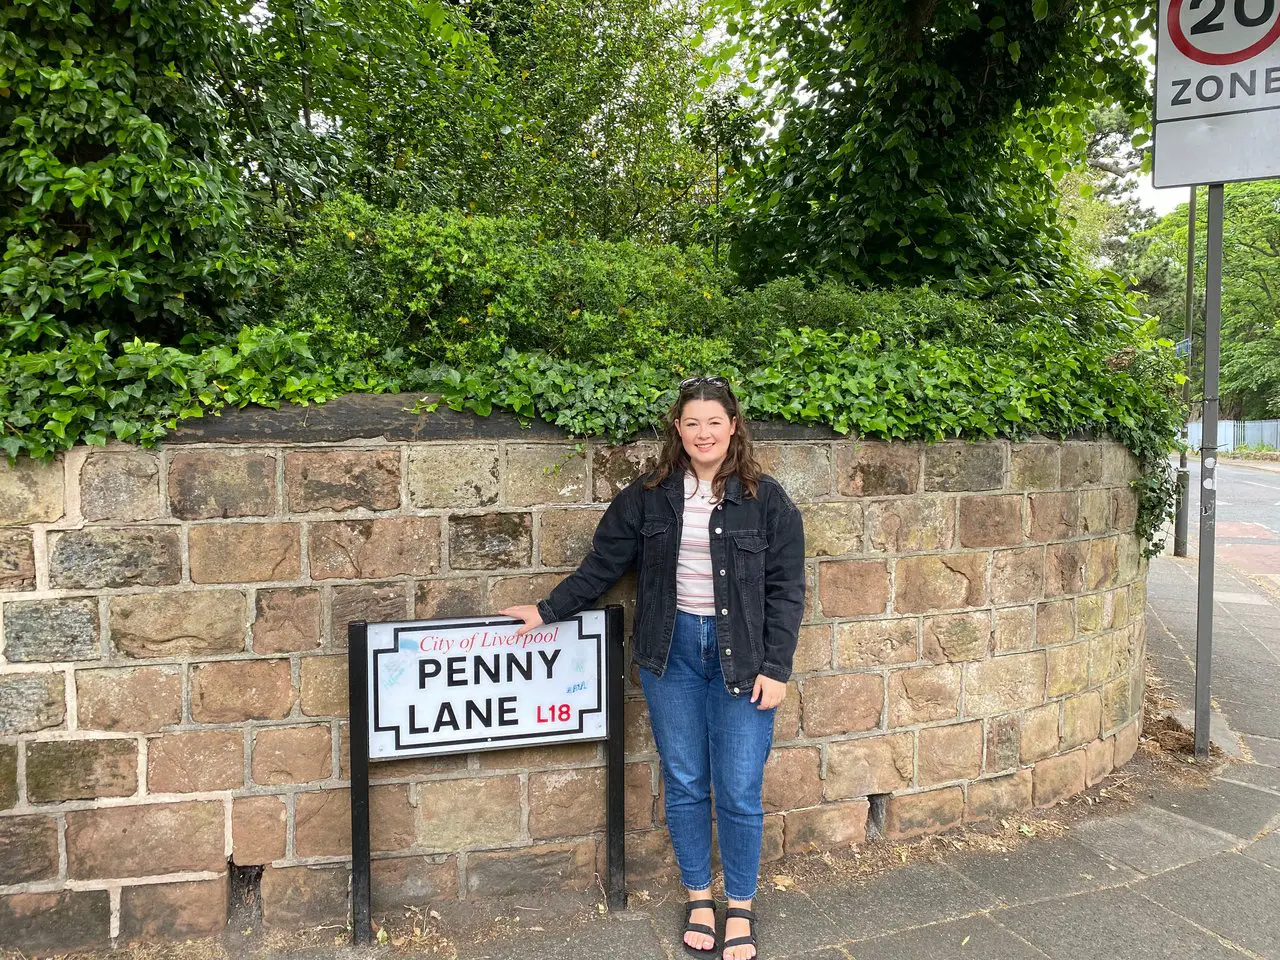 Ella at the Penny Lane street sign in Liverpool